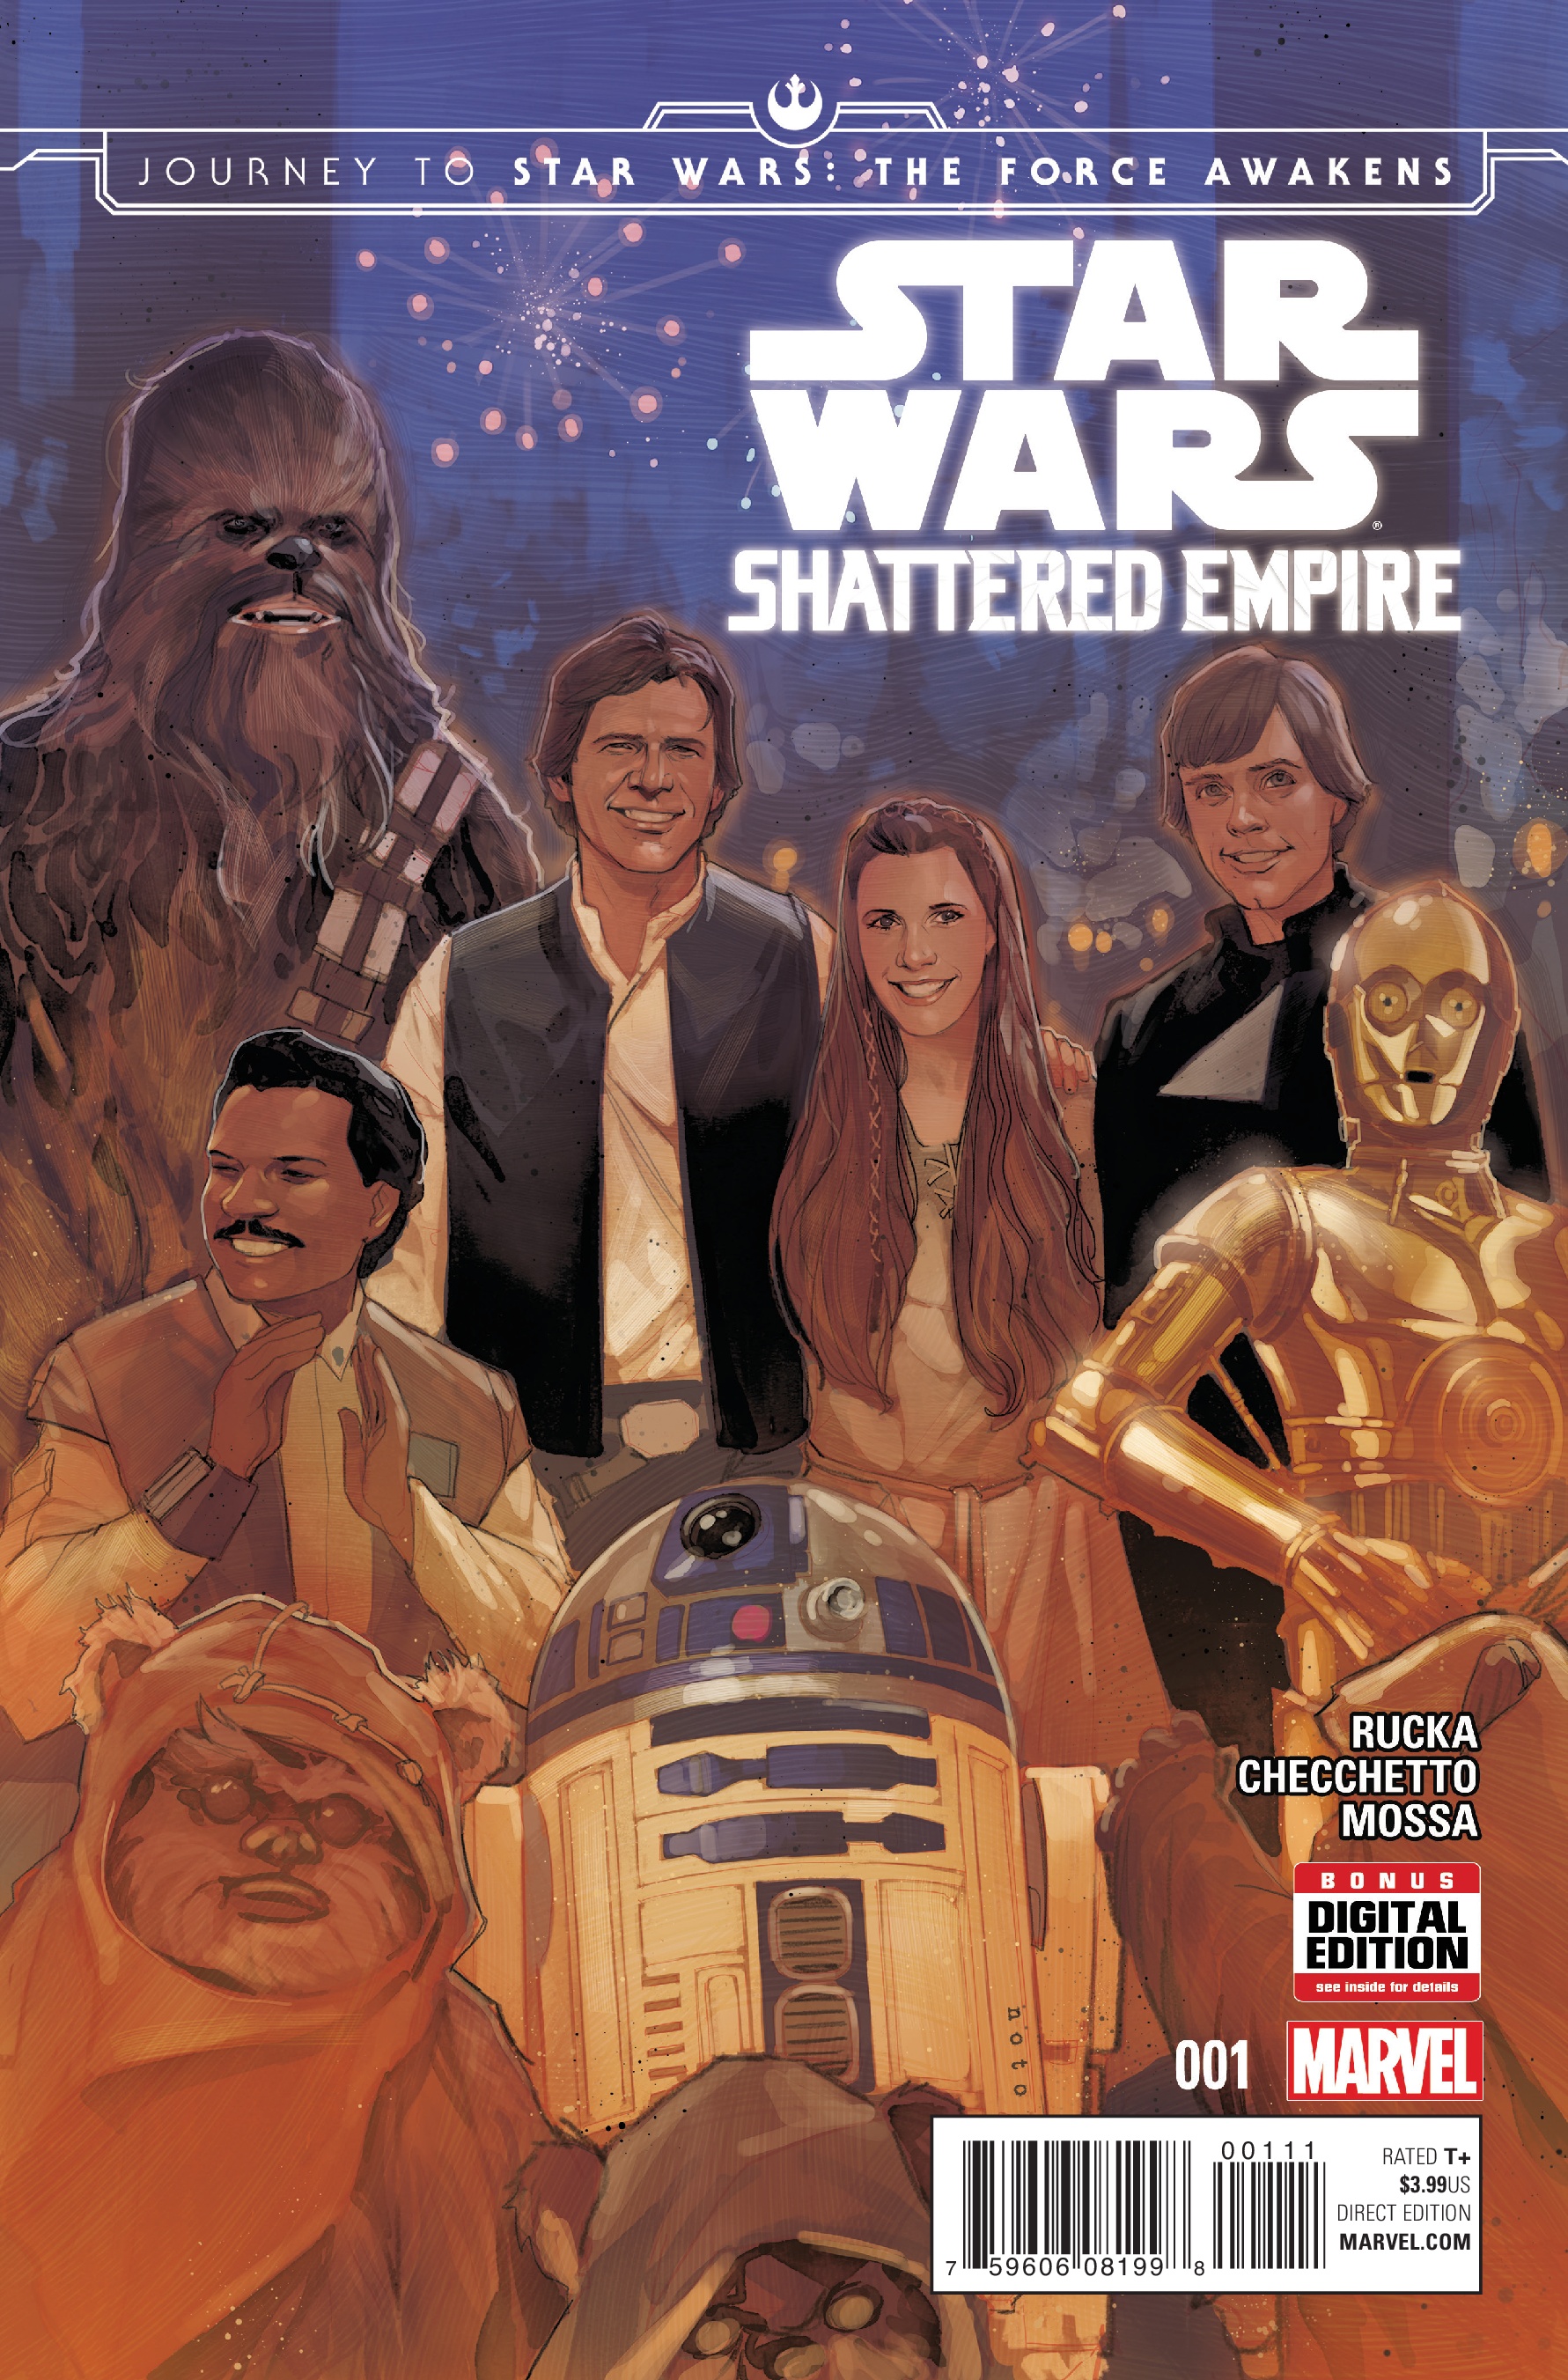 Star Wars Shattered Empire – Marvel’s First Star Wars Comic Set After the Classic Film Trilogy!